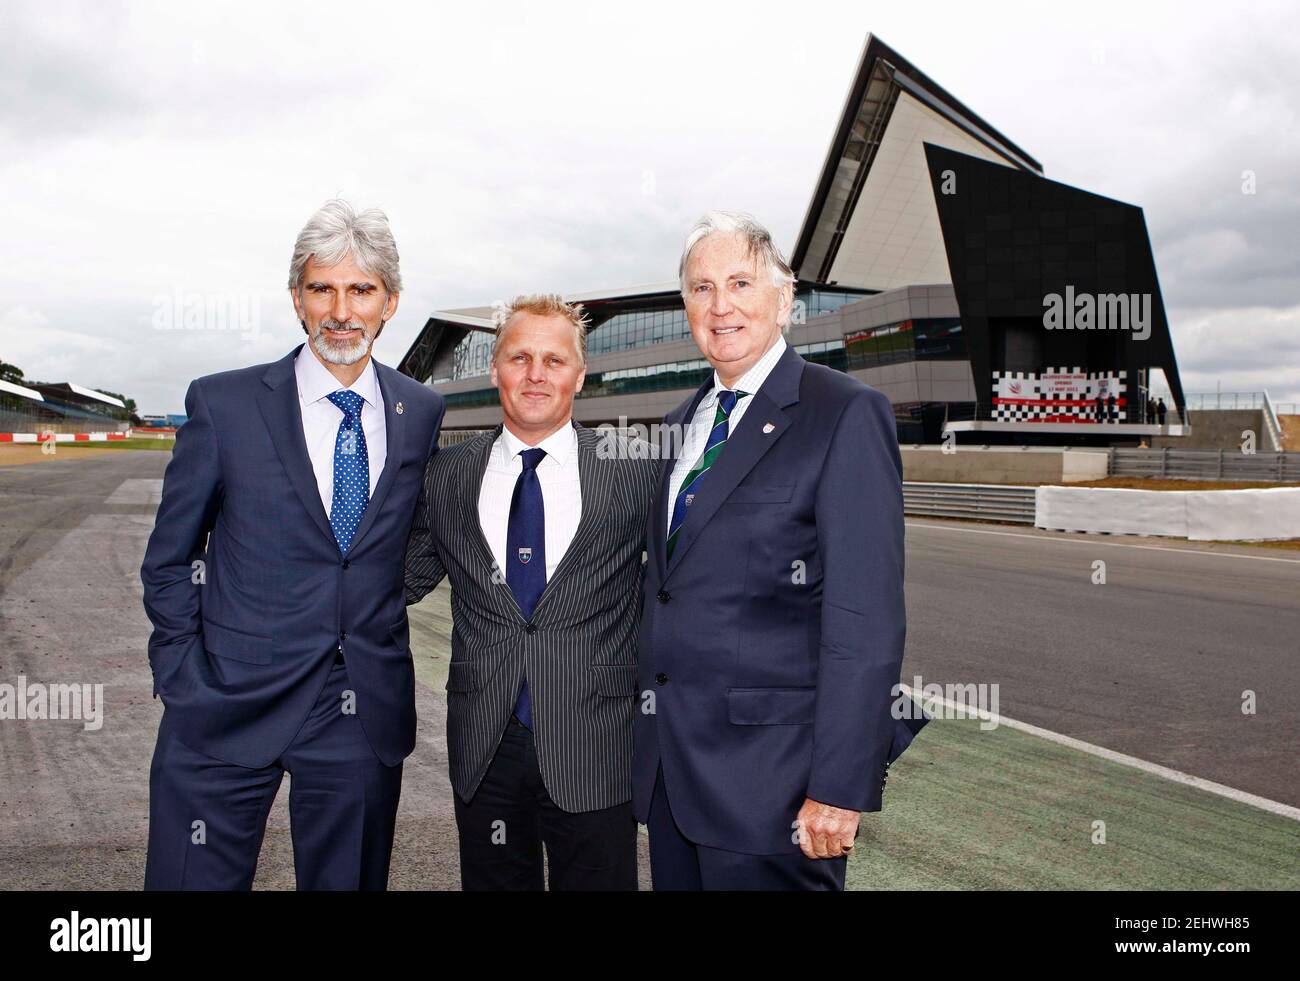 Formula One - F1 - Official launch of The Silverstone Wing  - The Silverstone Wing, Silverstone Circuit, Northamptonshire, NN12 8TN  - 17/5/11  Former Formula One Drivers Damon Hill (L), Johnny Herbert and John Watson (R)  Mandatory Credit: Action Images / Peter Cziborra  Livepic Stock Photo